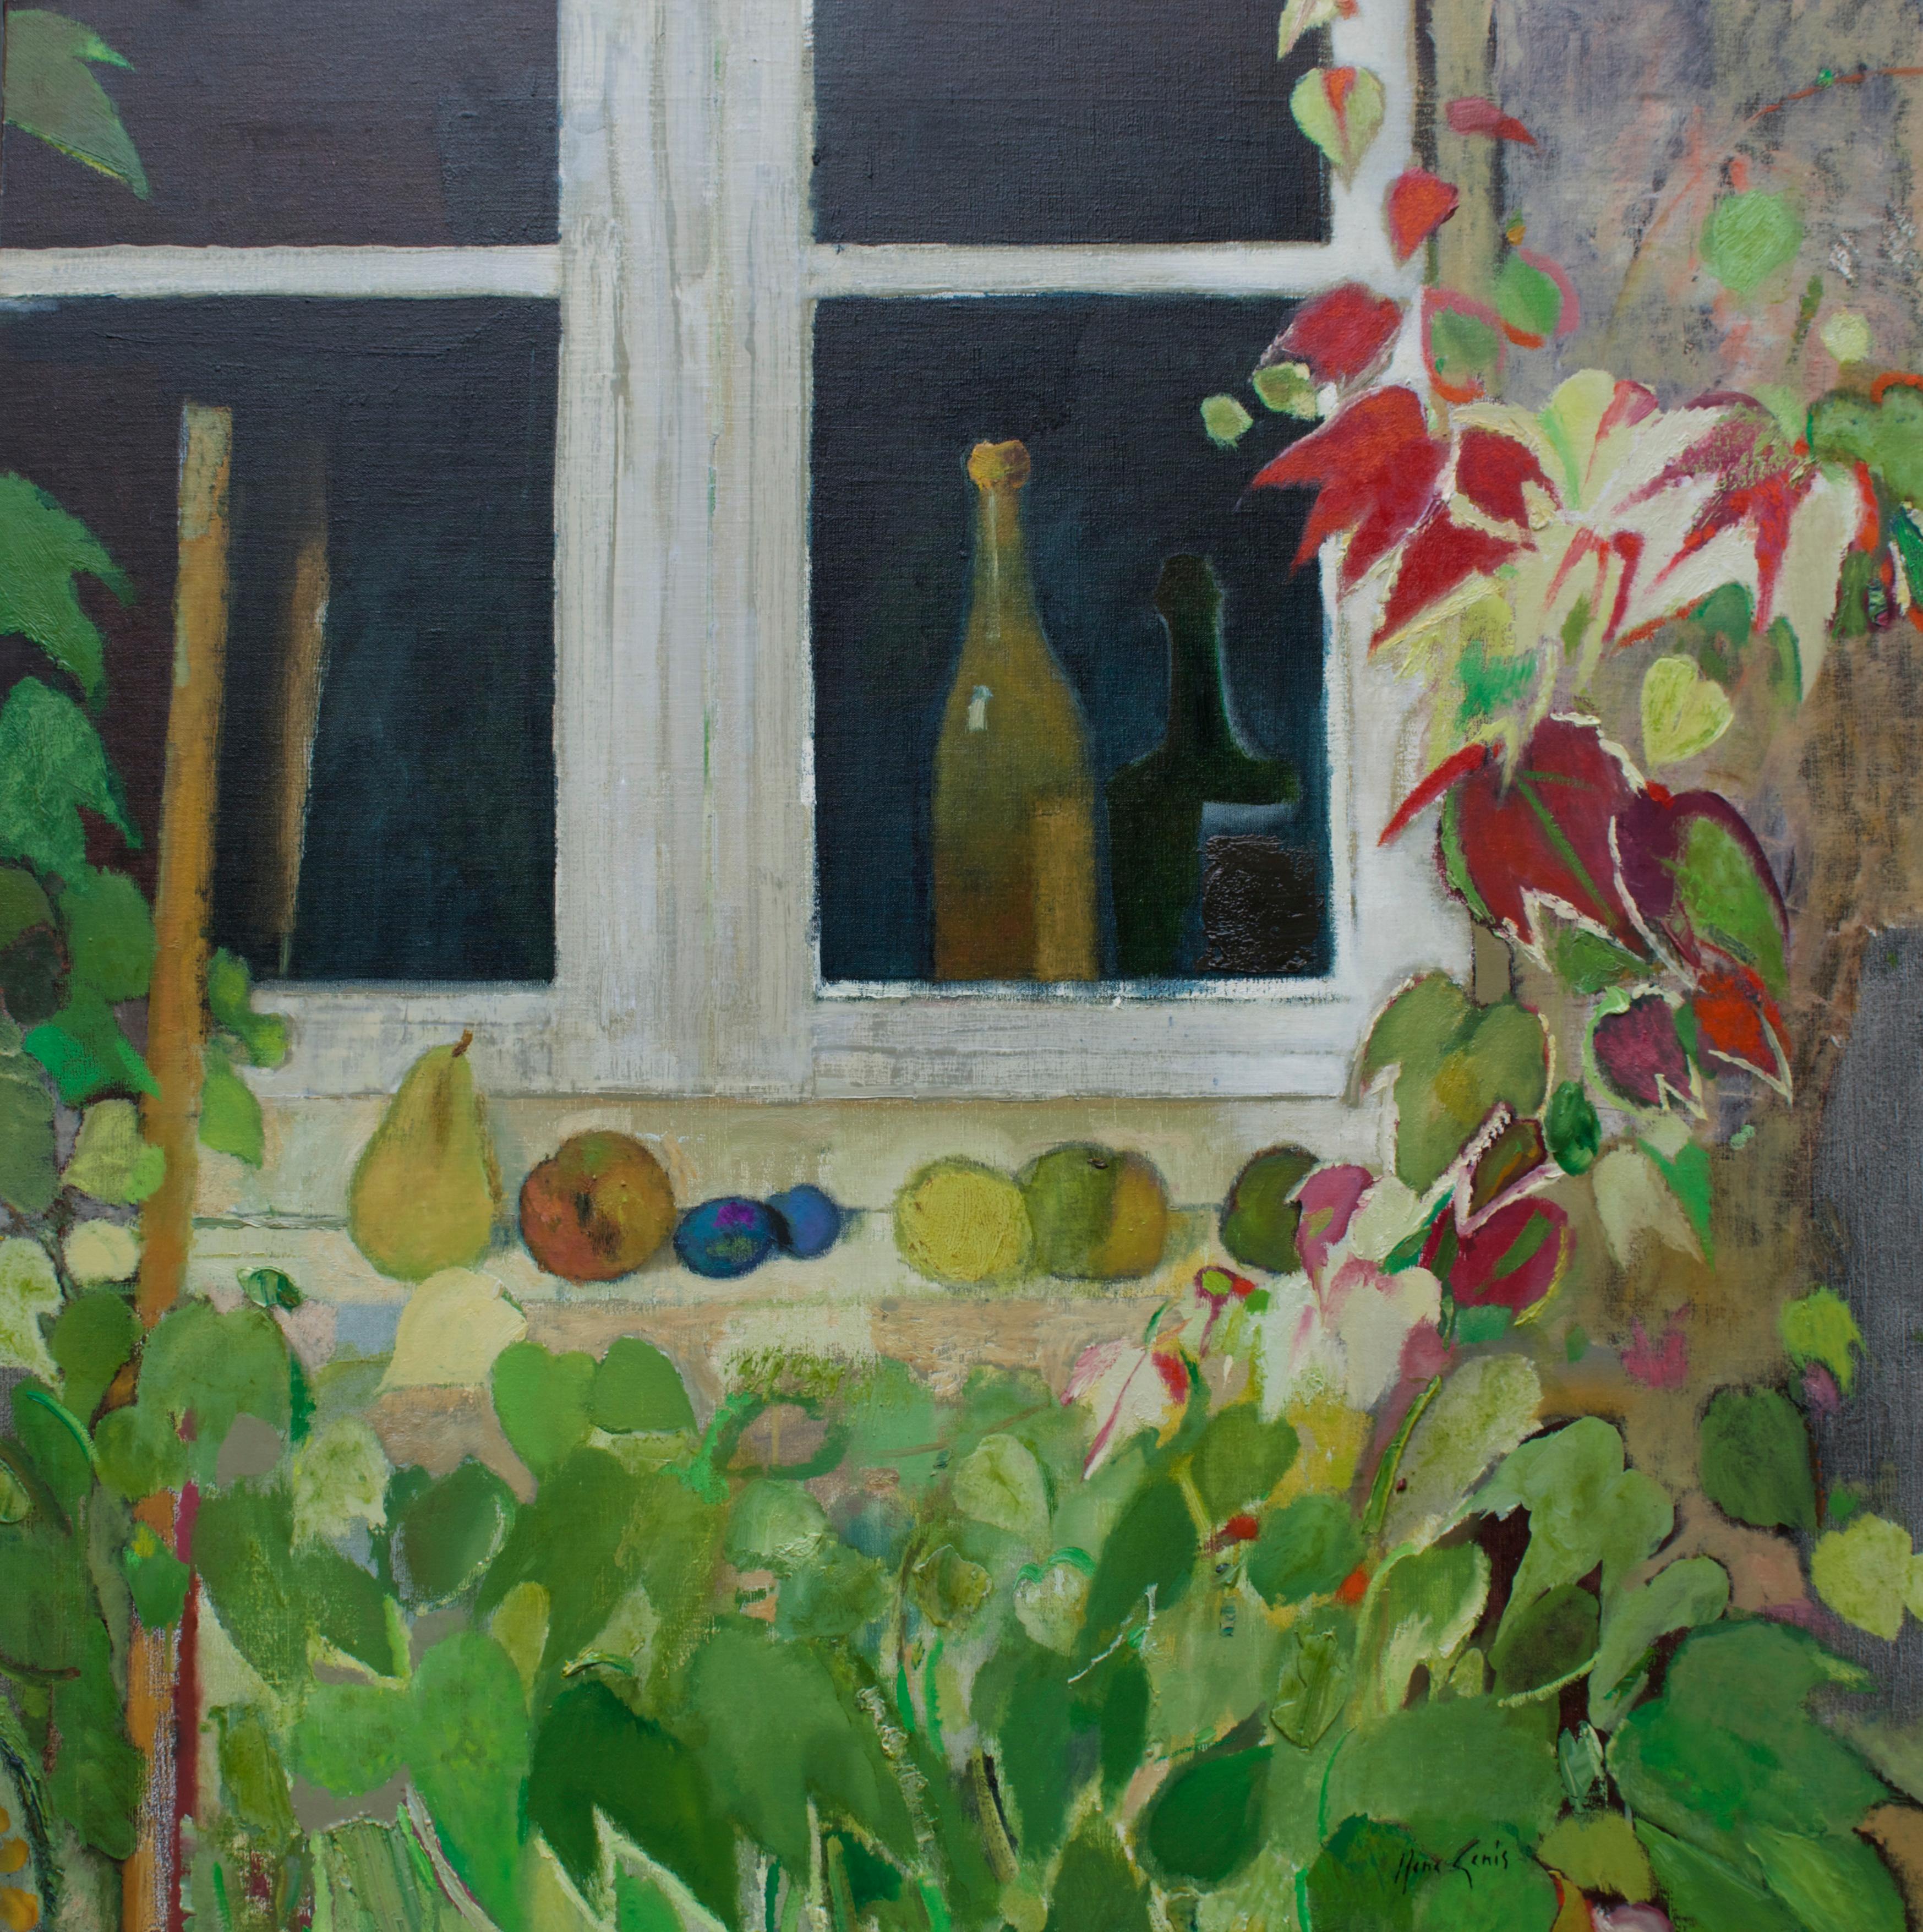 René Genis (1922-2004)
 
Fenêtre à la vigne-vierge
(window with virginia creeper),
signed and inscribed with title to the reverse,
oil on canvas,
39 x 39 inches; 100 x 100 cm. 
​
Provenance: The estate of fellow artist and friend Guy Bardone

A very